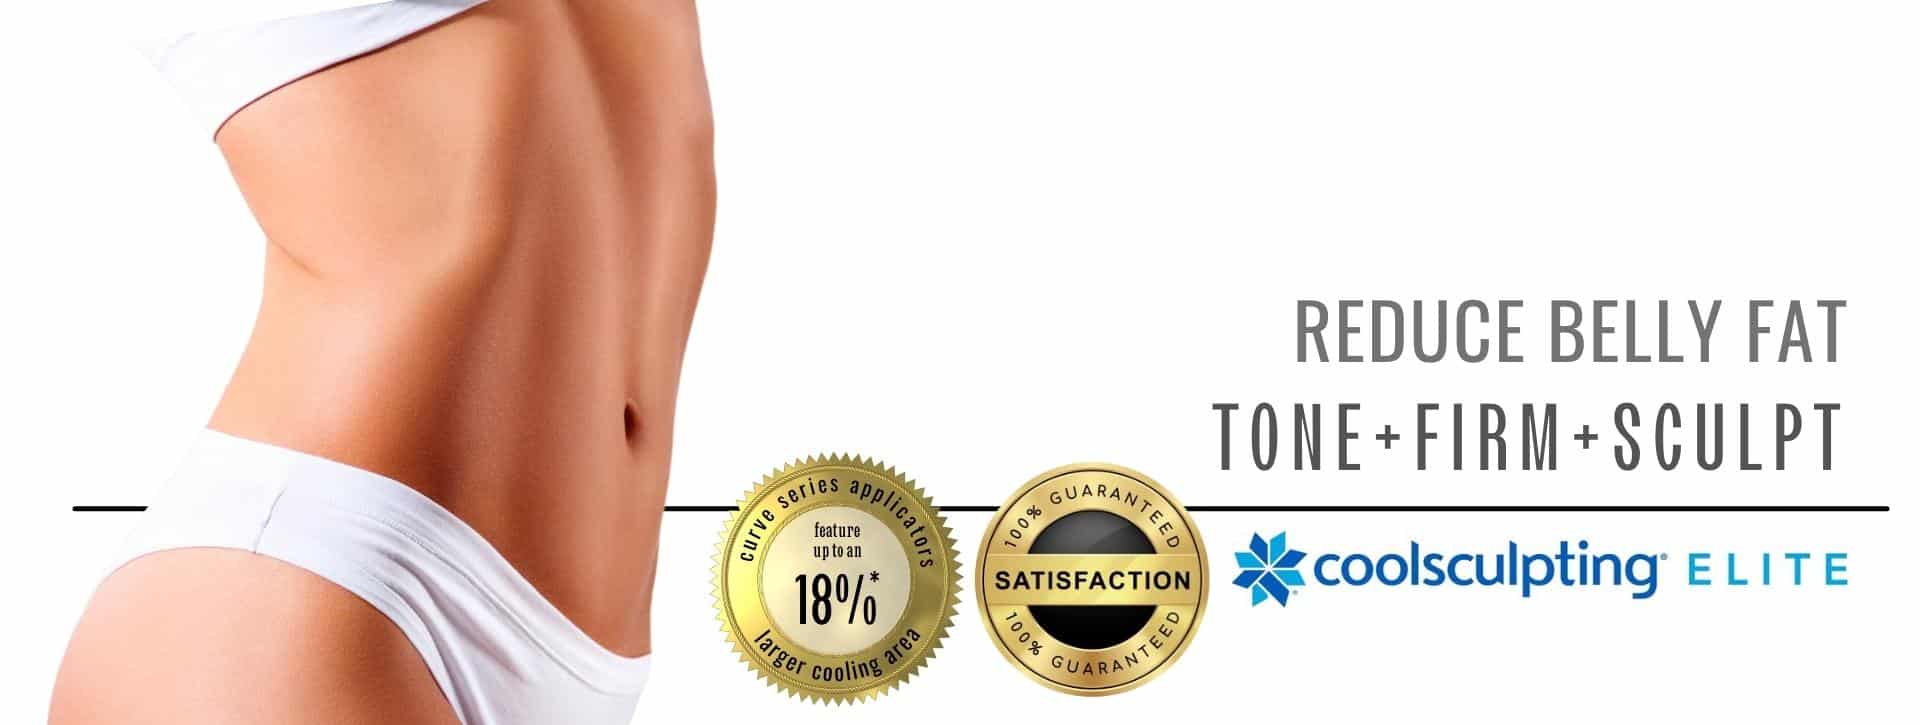 Woman in white underwear with a flat abdomen promoting CoolSculpting Elite -a service offered at Admire Aesthetics